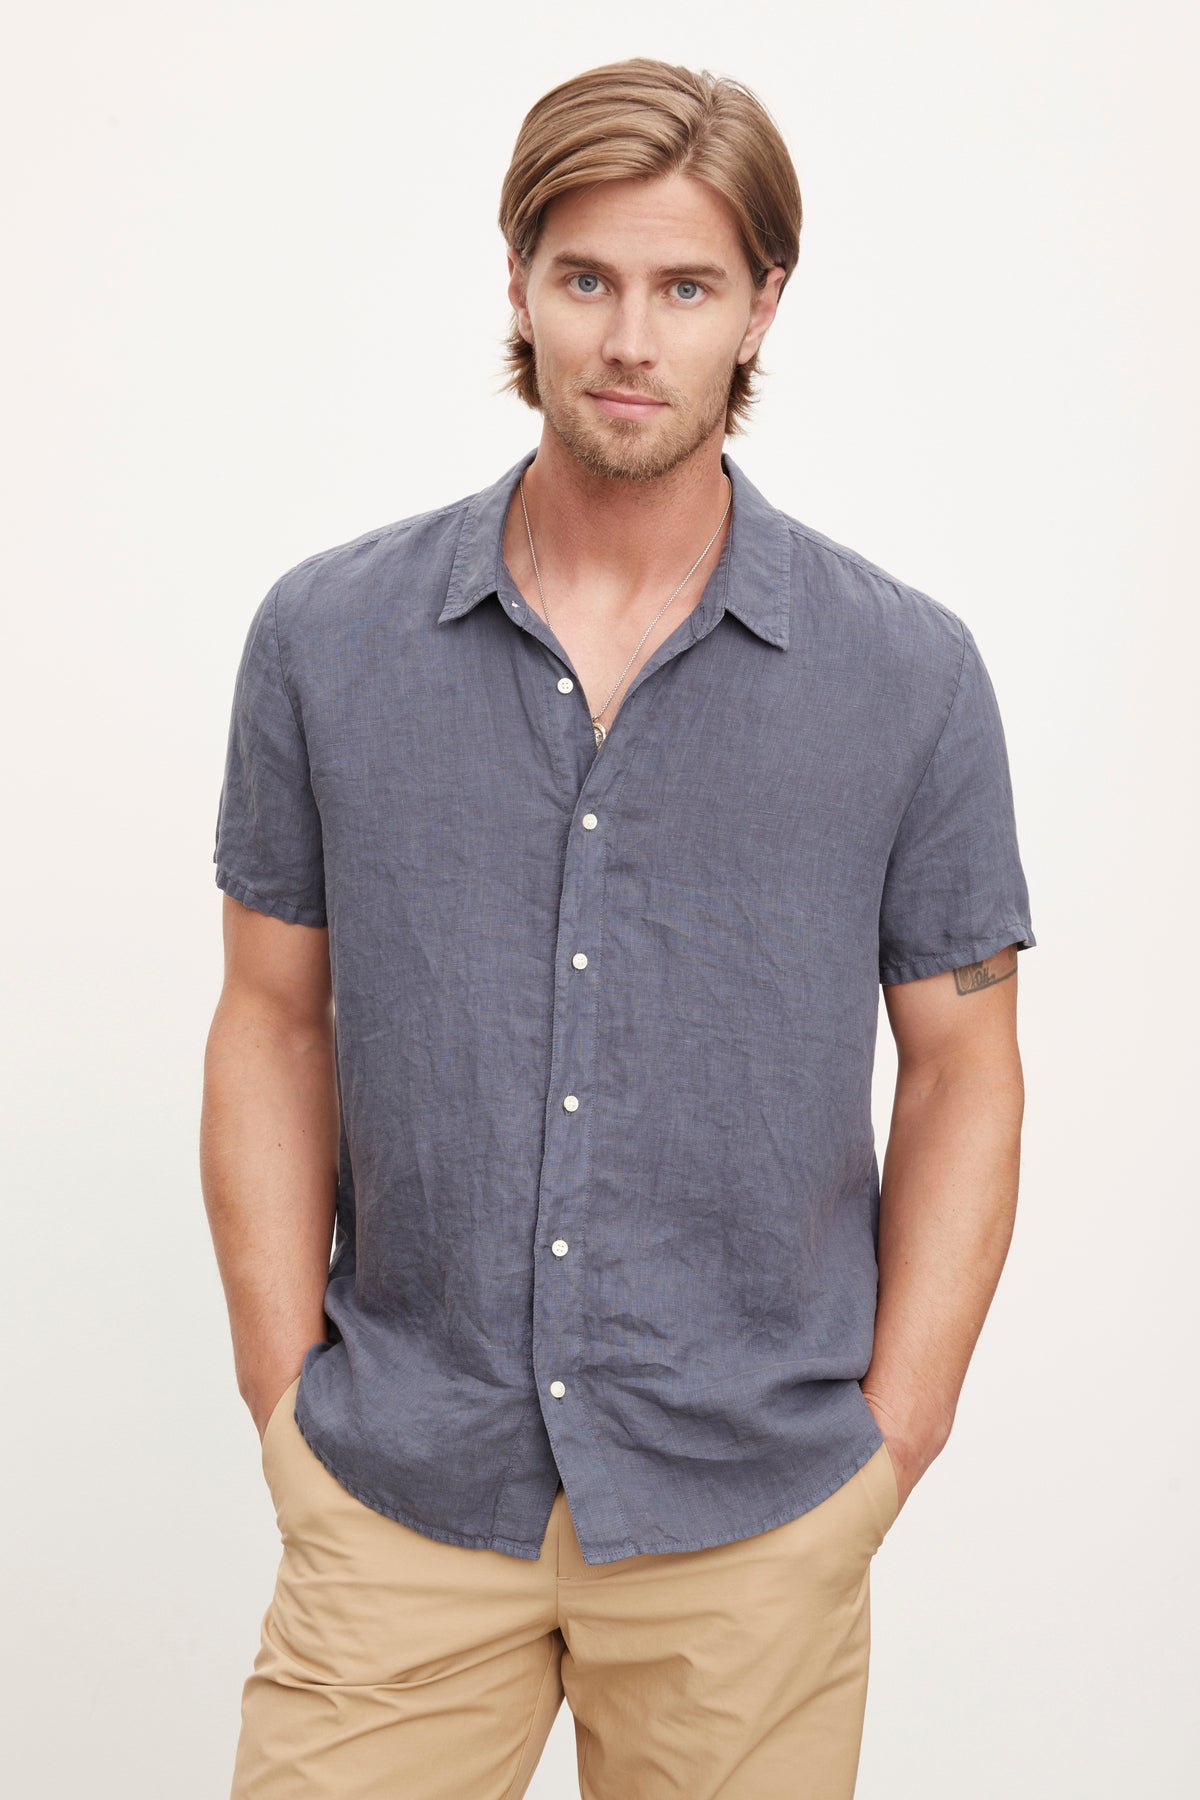   A man with shoulder-length hair stands with his hands in his pockets, wearing a short-sleeve MACKIE LINEN BUTTON-UP SHIRT by Velvet by Graham & Spencer and tan pants, perfect for a summer wardrobe. 